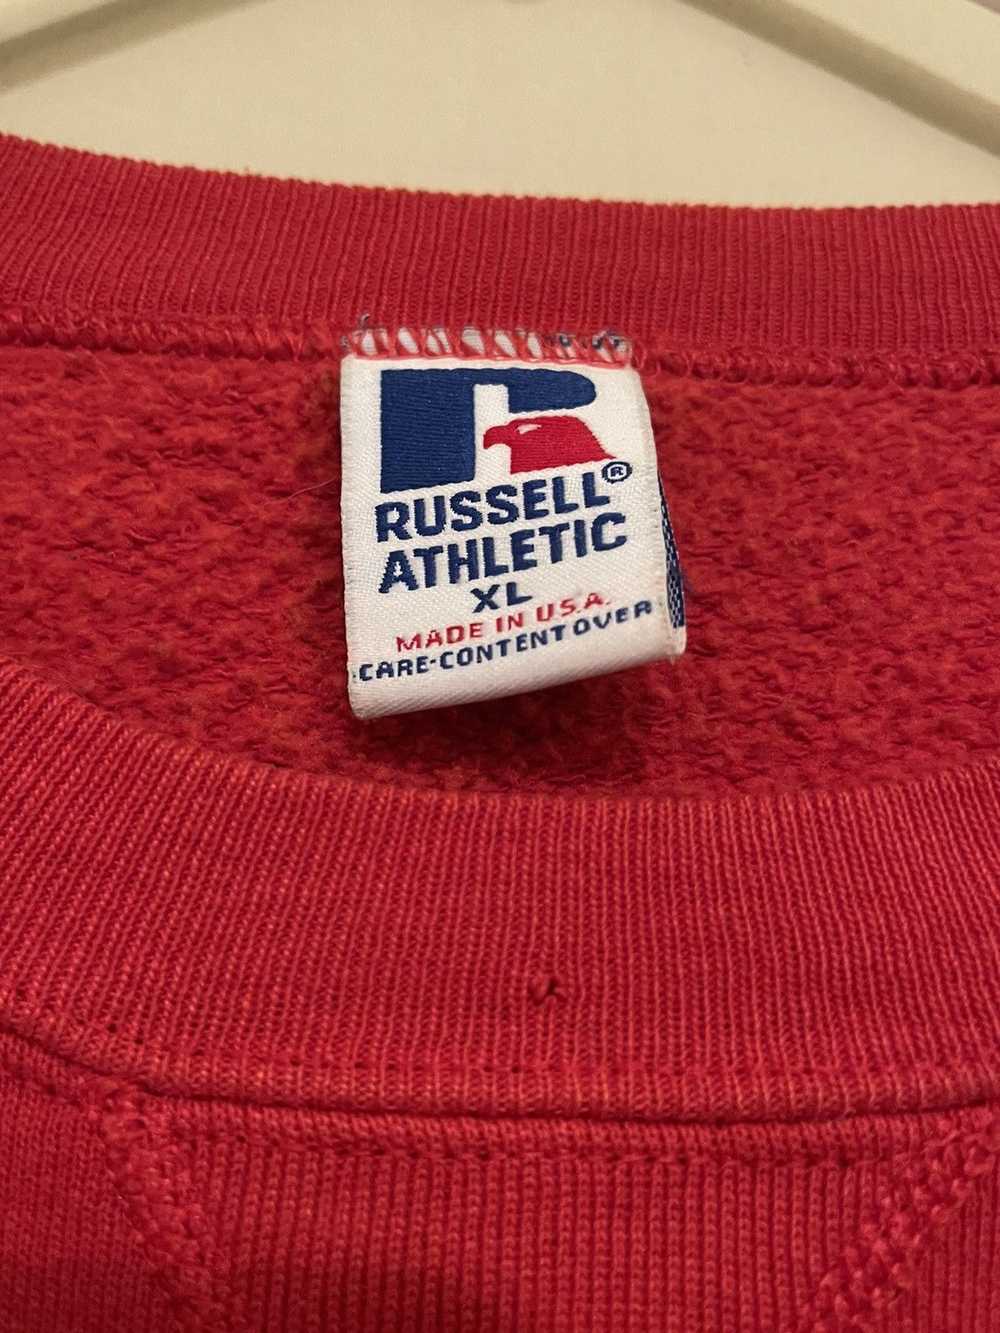 Made In Usa × Russell Athletic × Vintage Vintage … - image 3